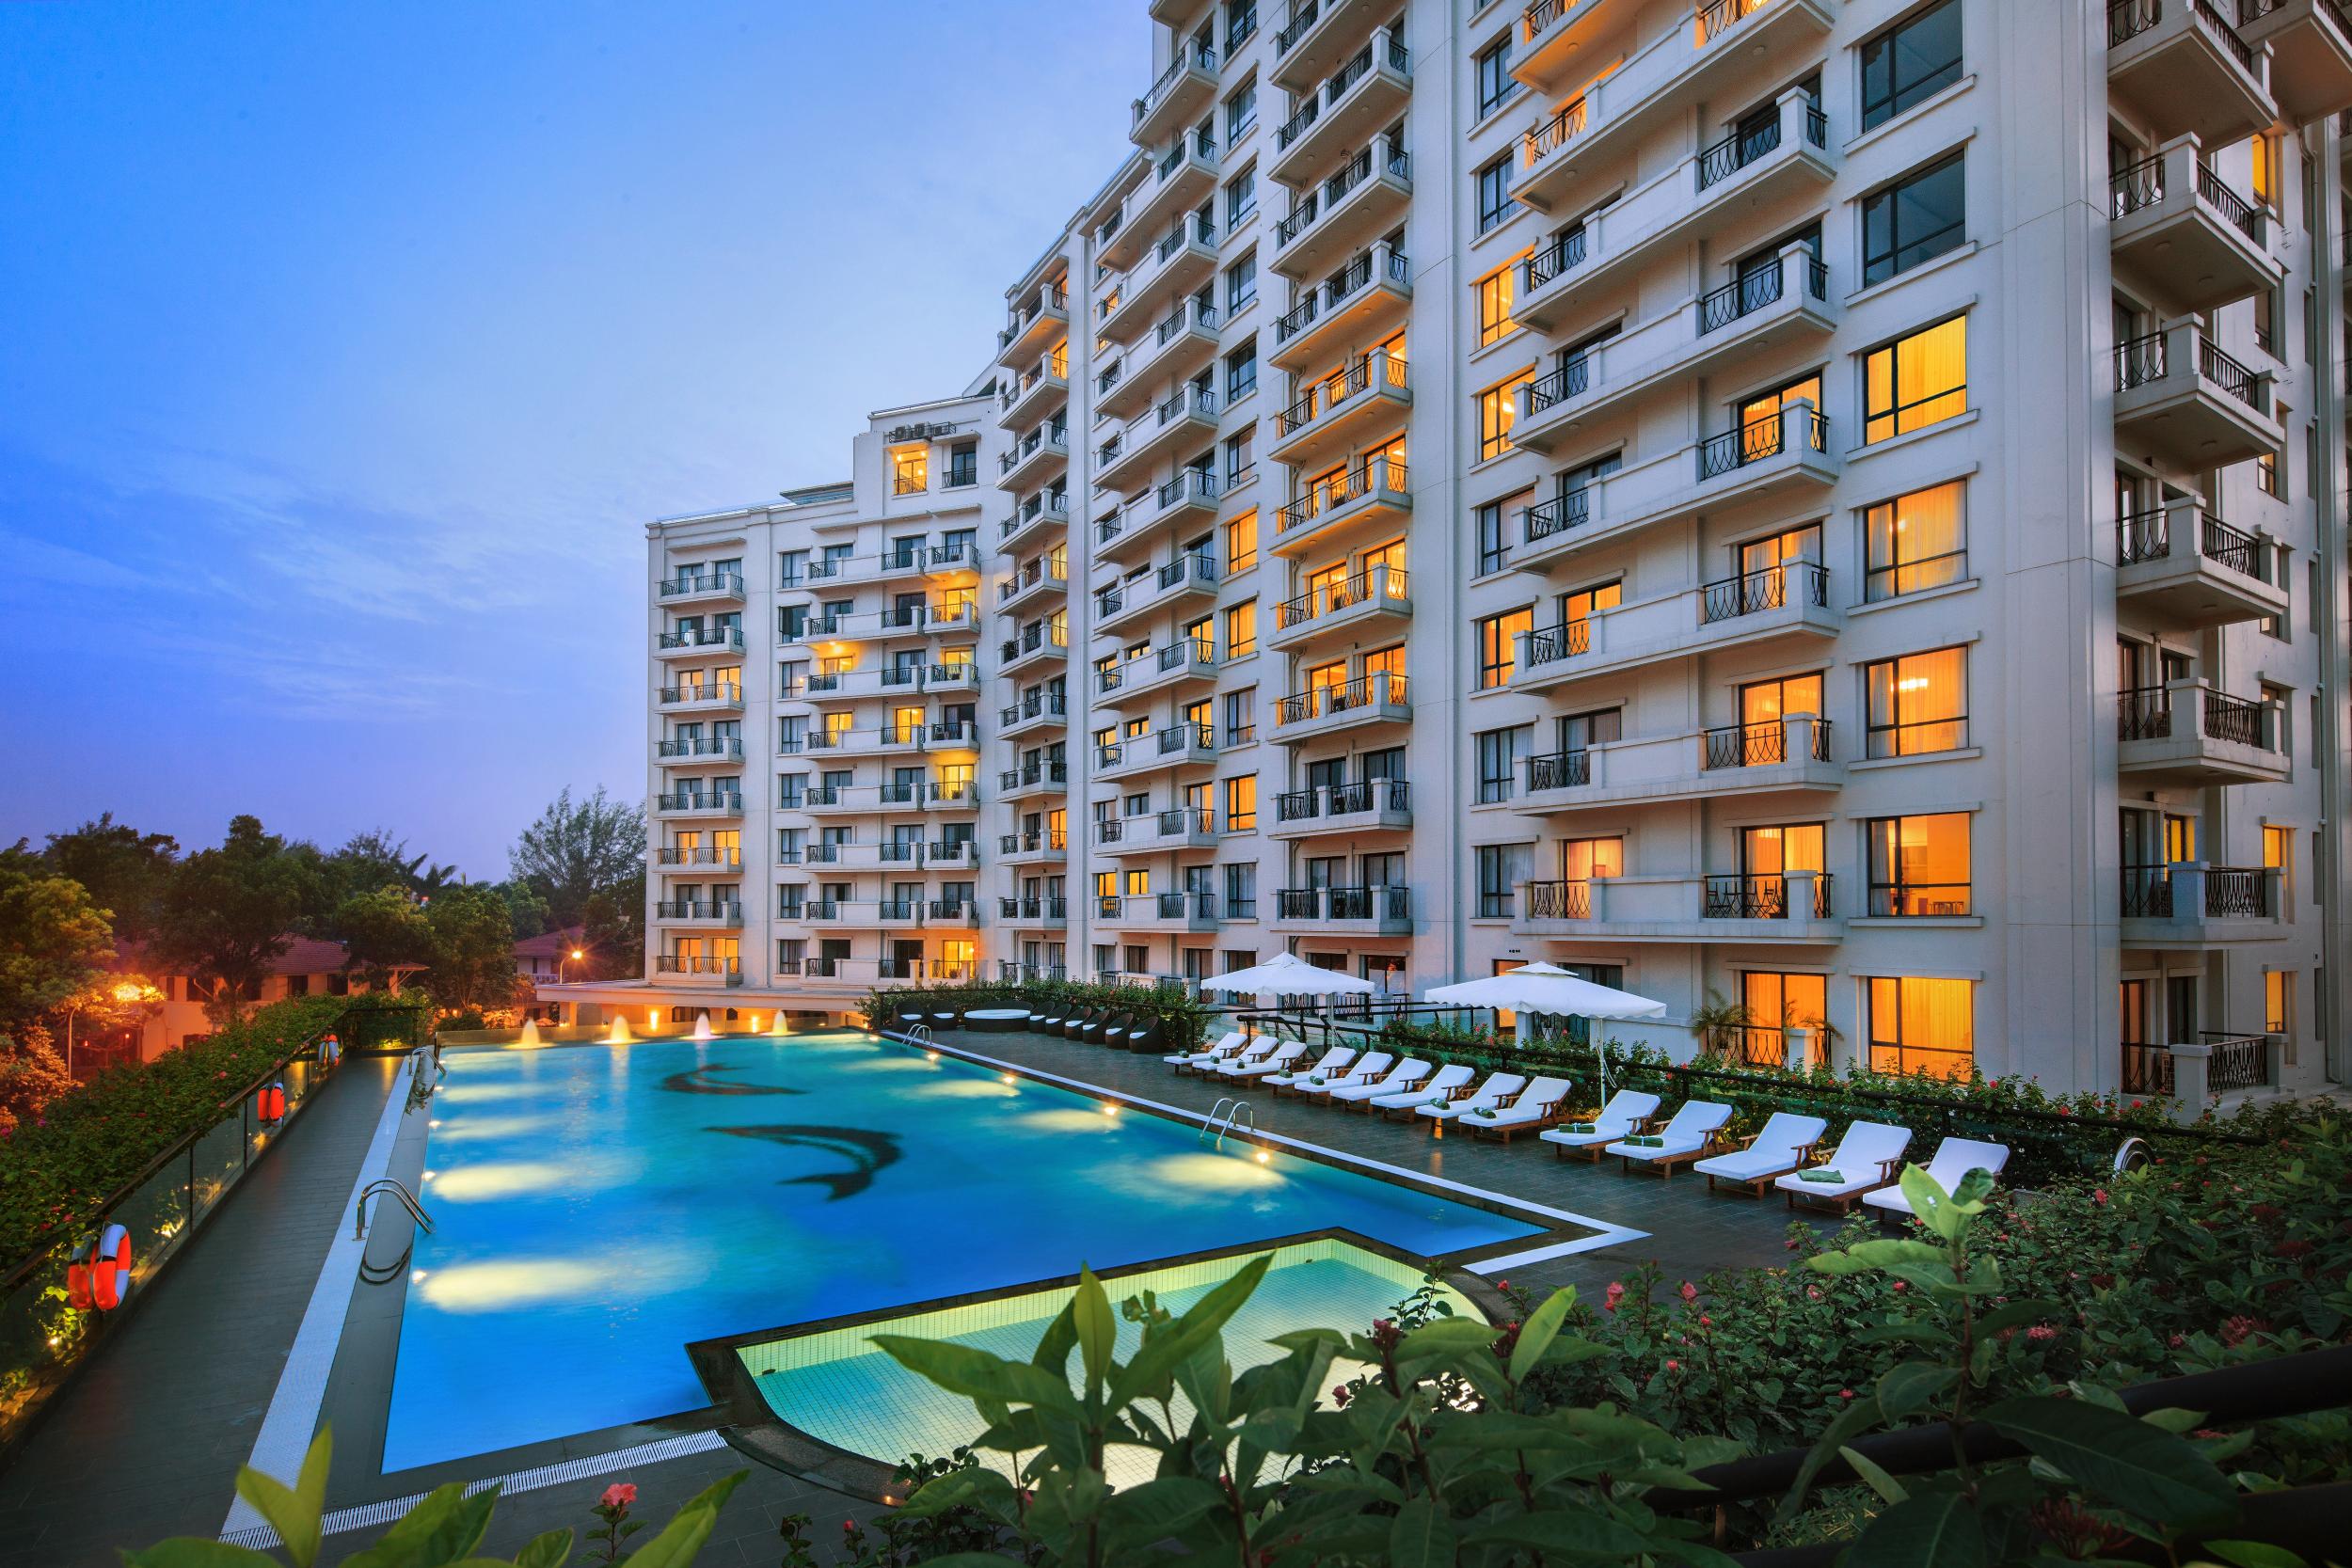 When the humidity gets too much, take a dip in the outdoor pool at Elegant Suites Westlake